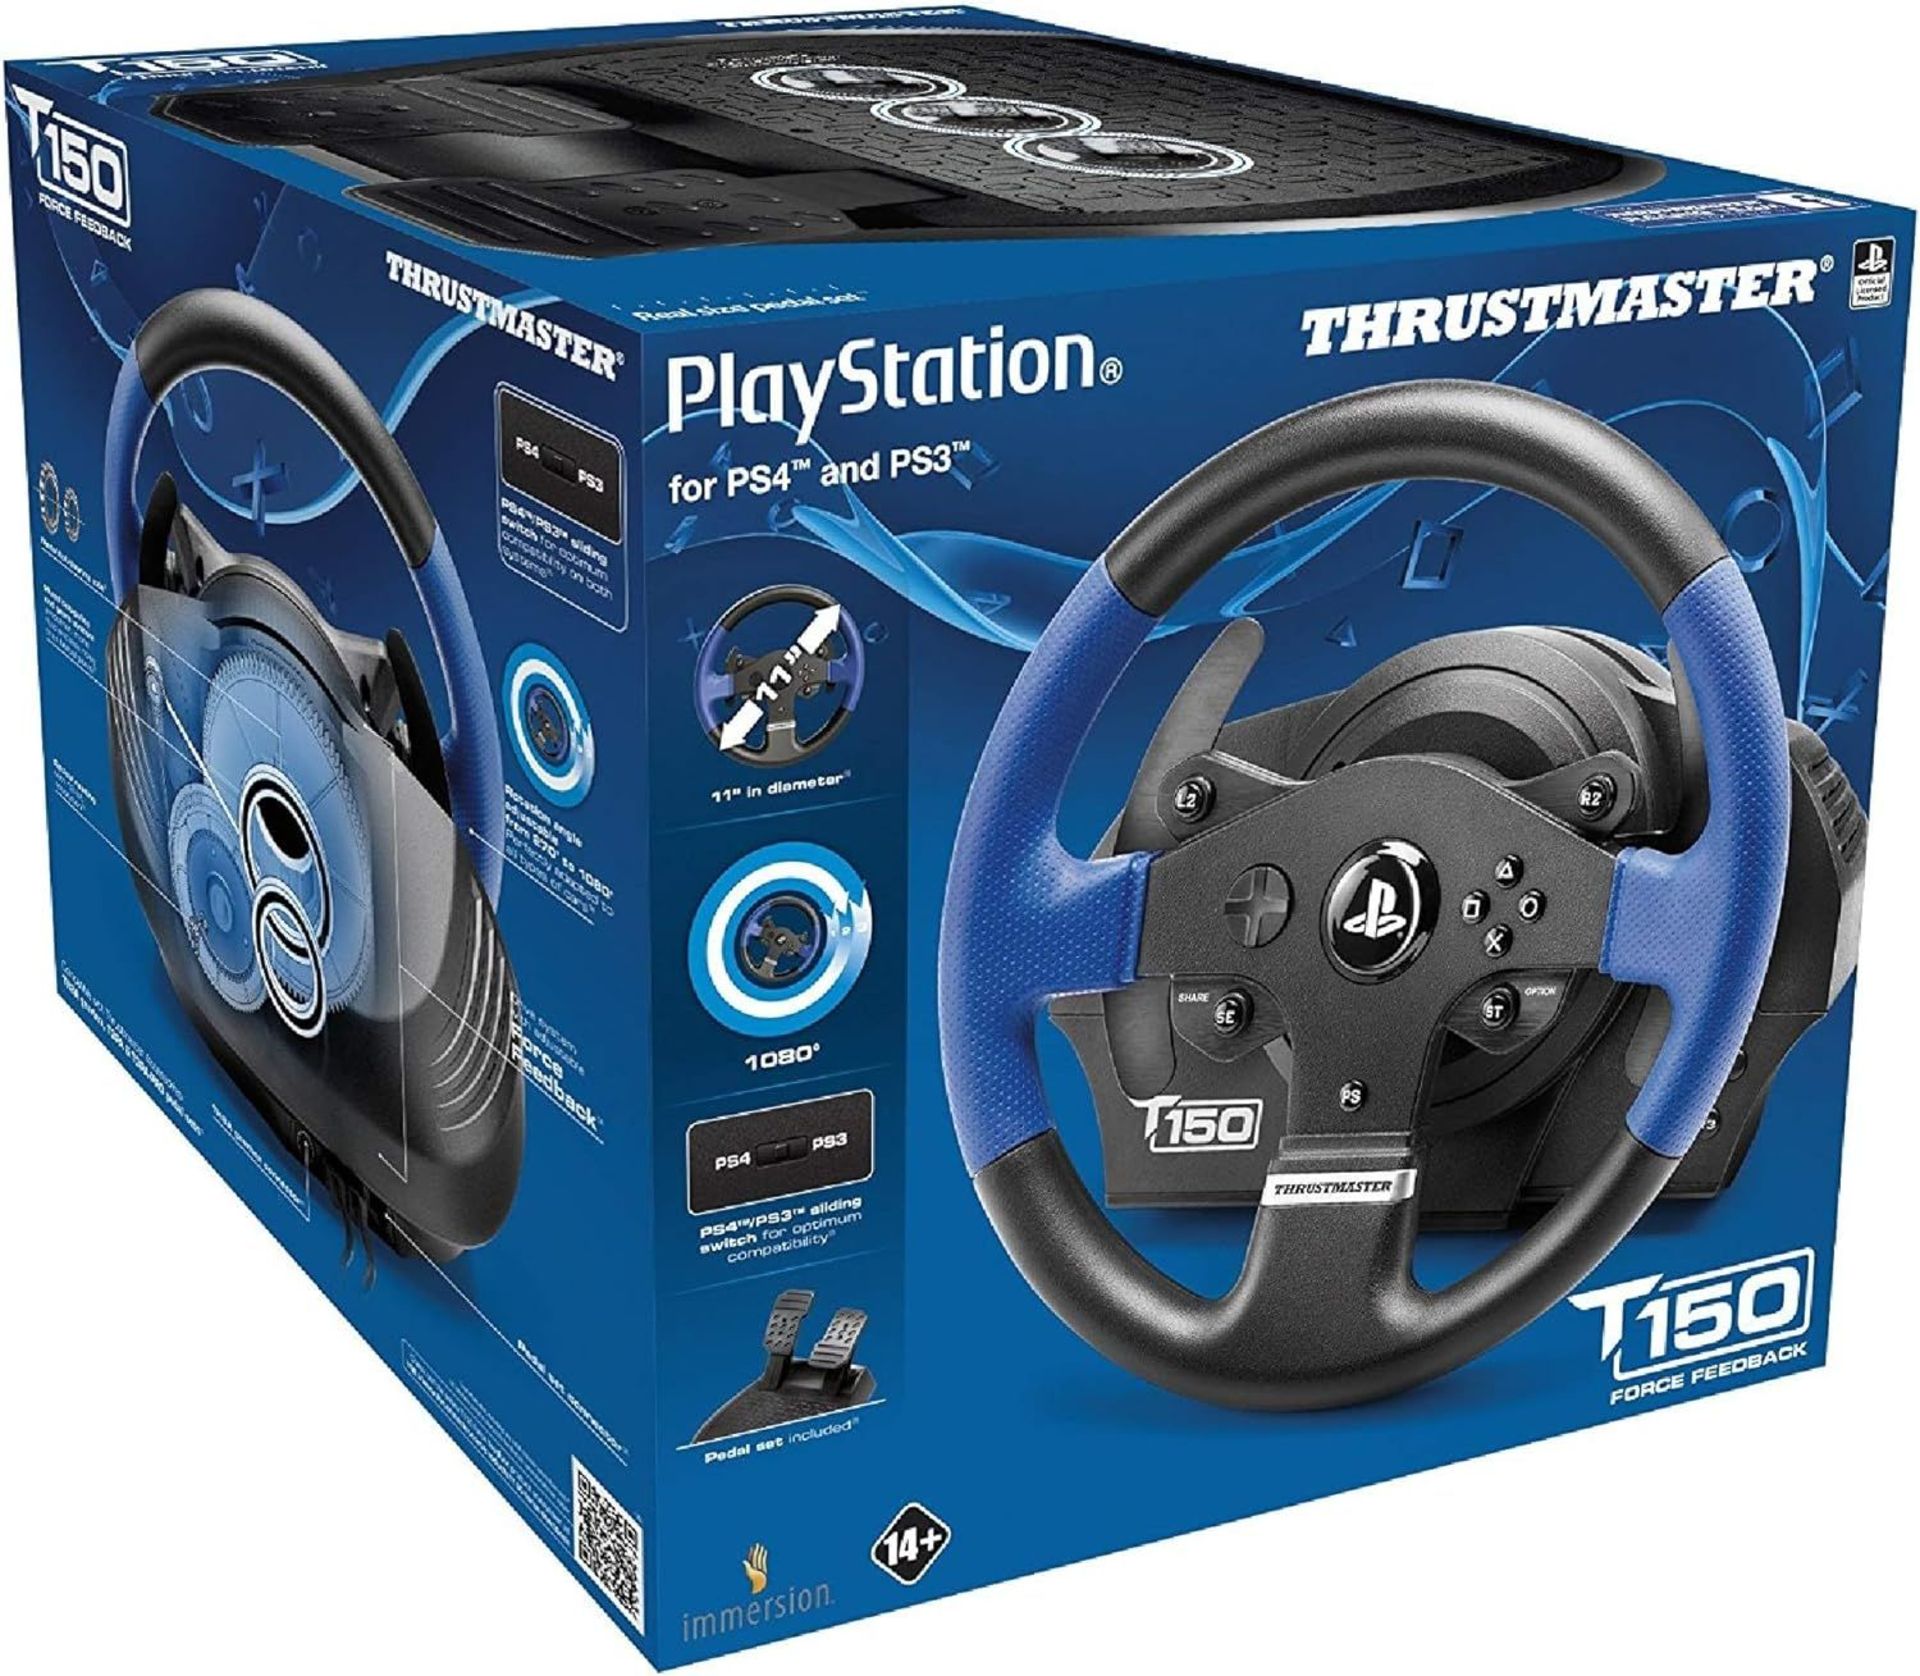 THRUSTMASTER T150 Force Ergonomic Racing Wheel for PS5, PS4 and PC Black, Blue. - RRP £409.00. - - Image 3 of 3